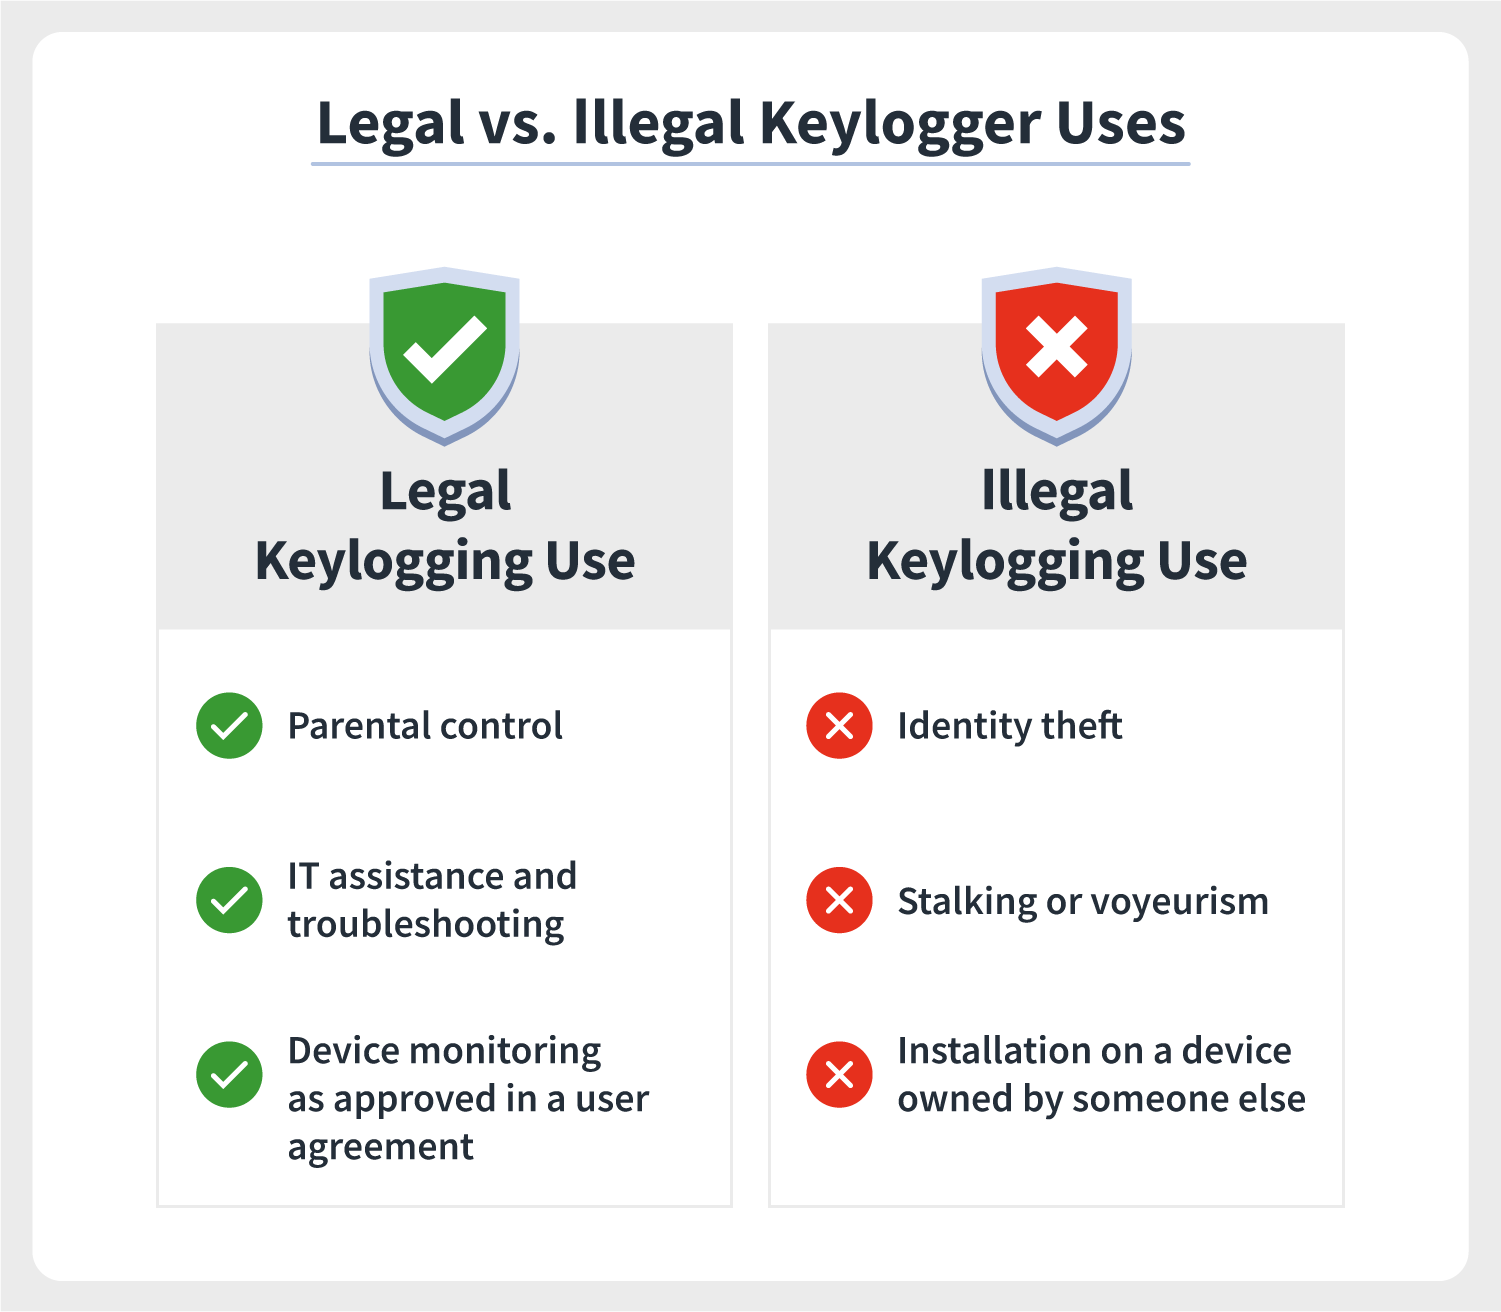 Three common legal and illegal keylogger uses appear side by side in two columns.